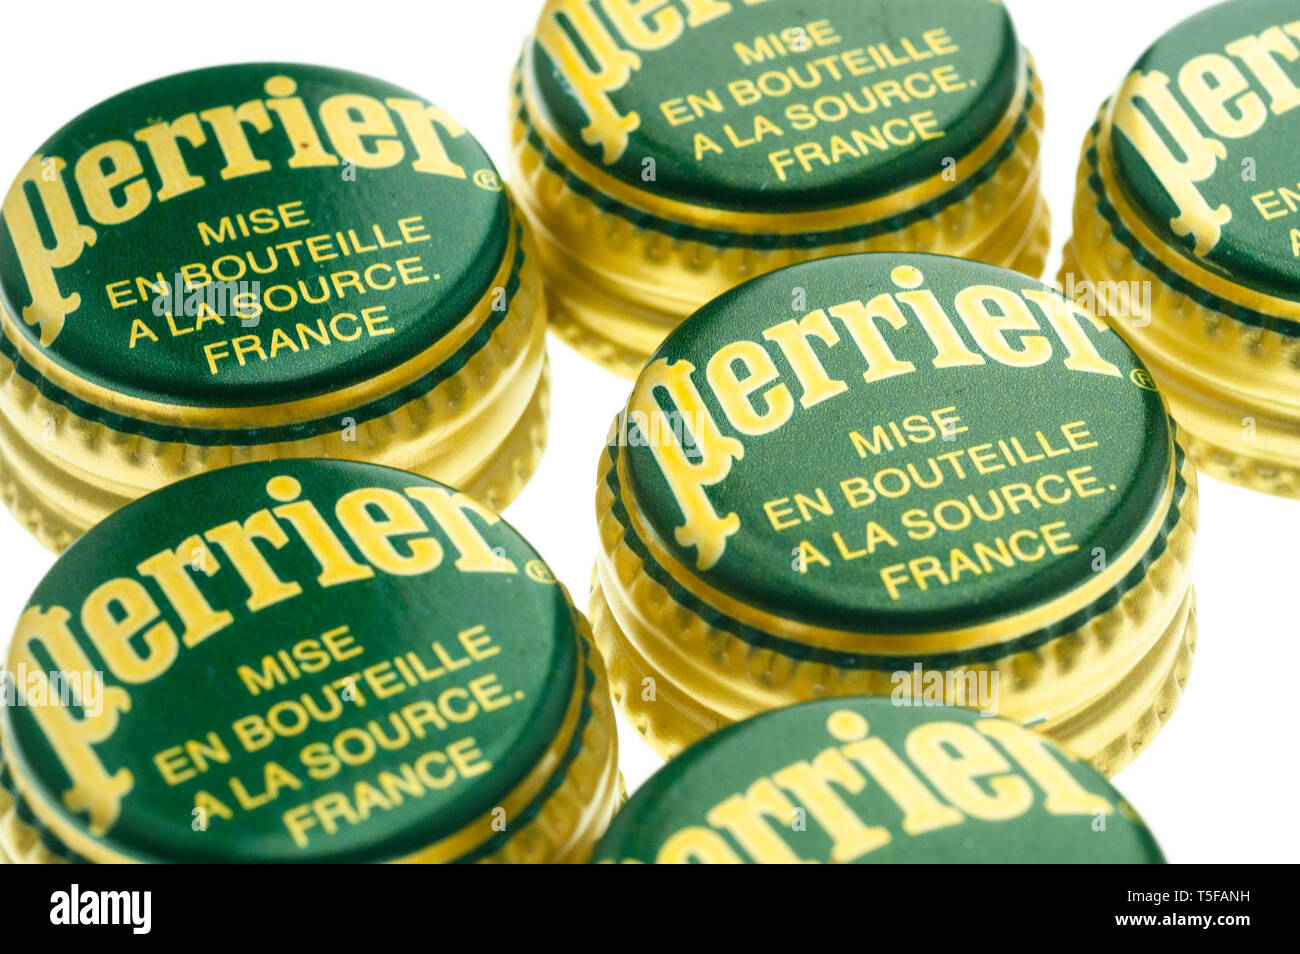 Perrier Bottle Tops, Perrier is a French brand of natural mineral water from its source in Vergeze. Stock Photo